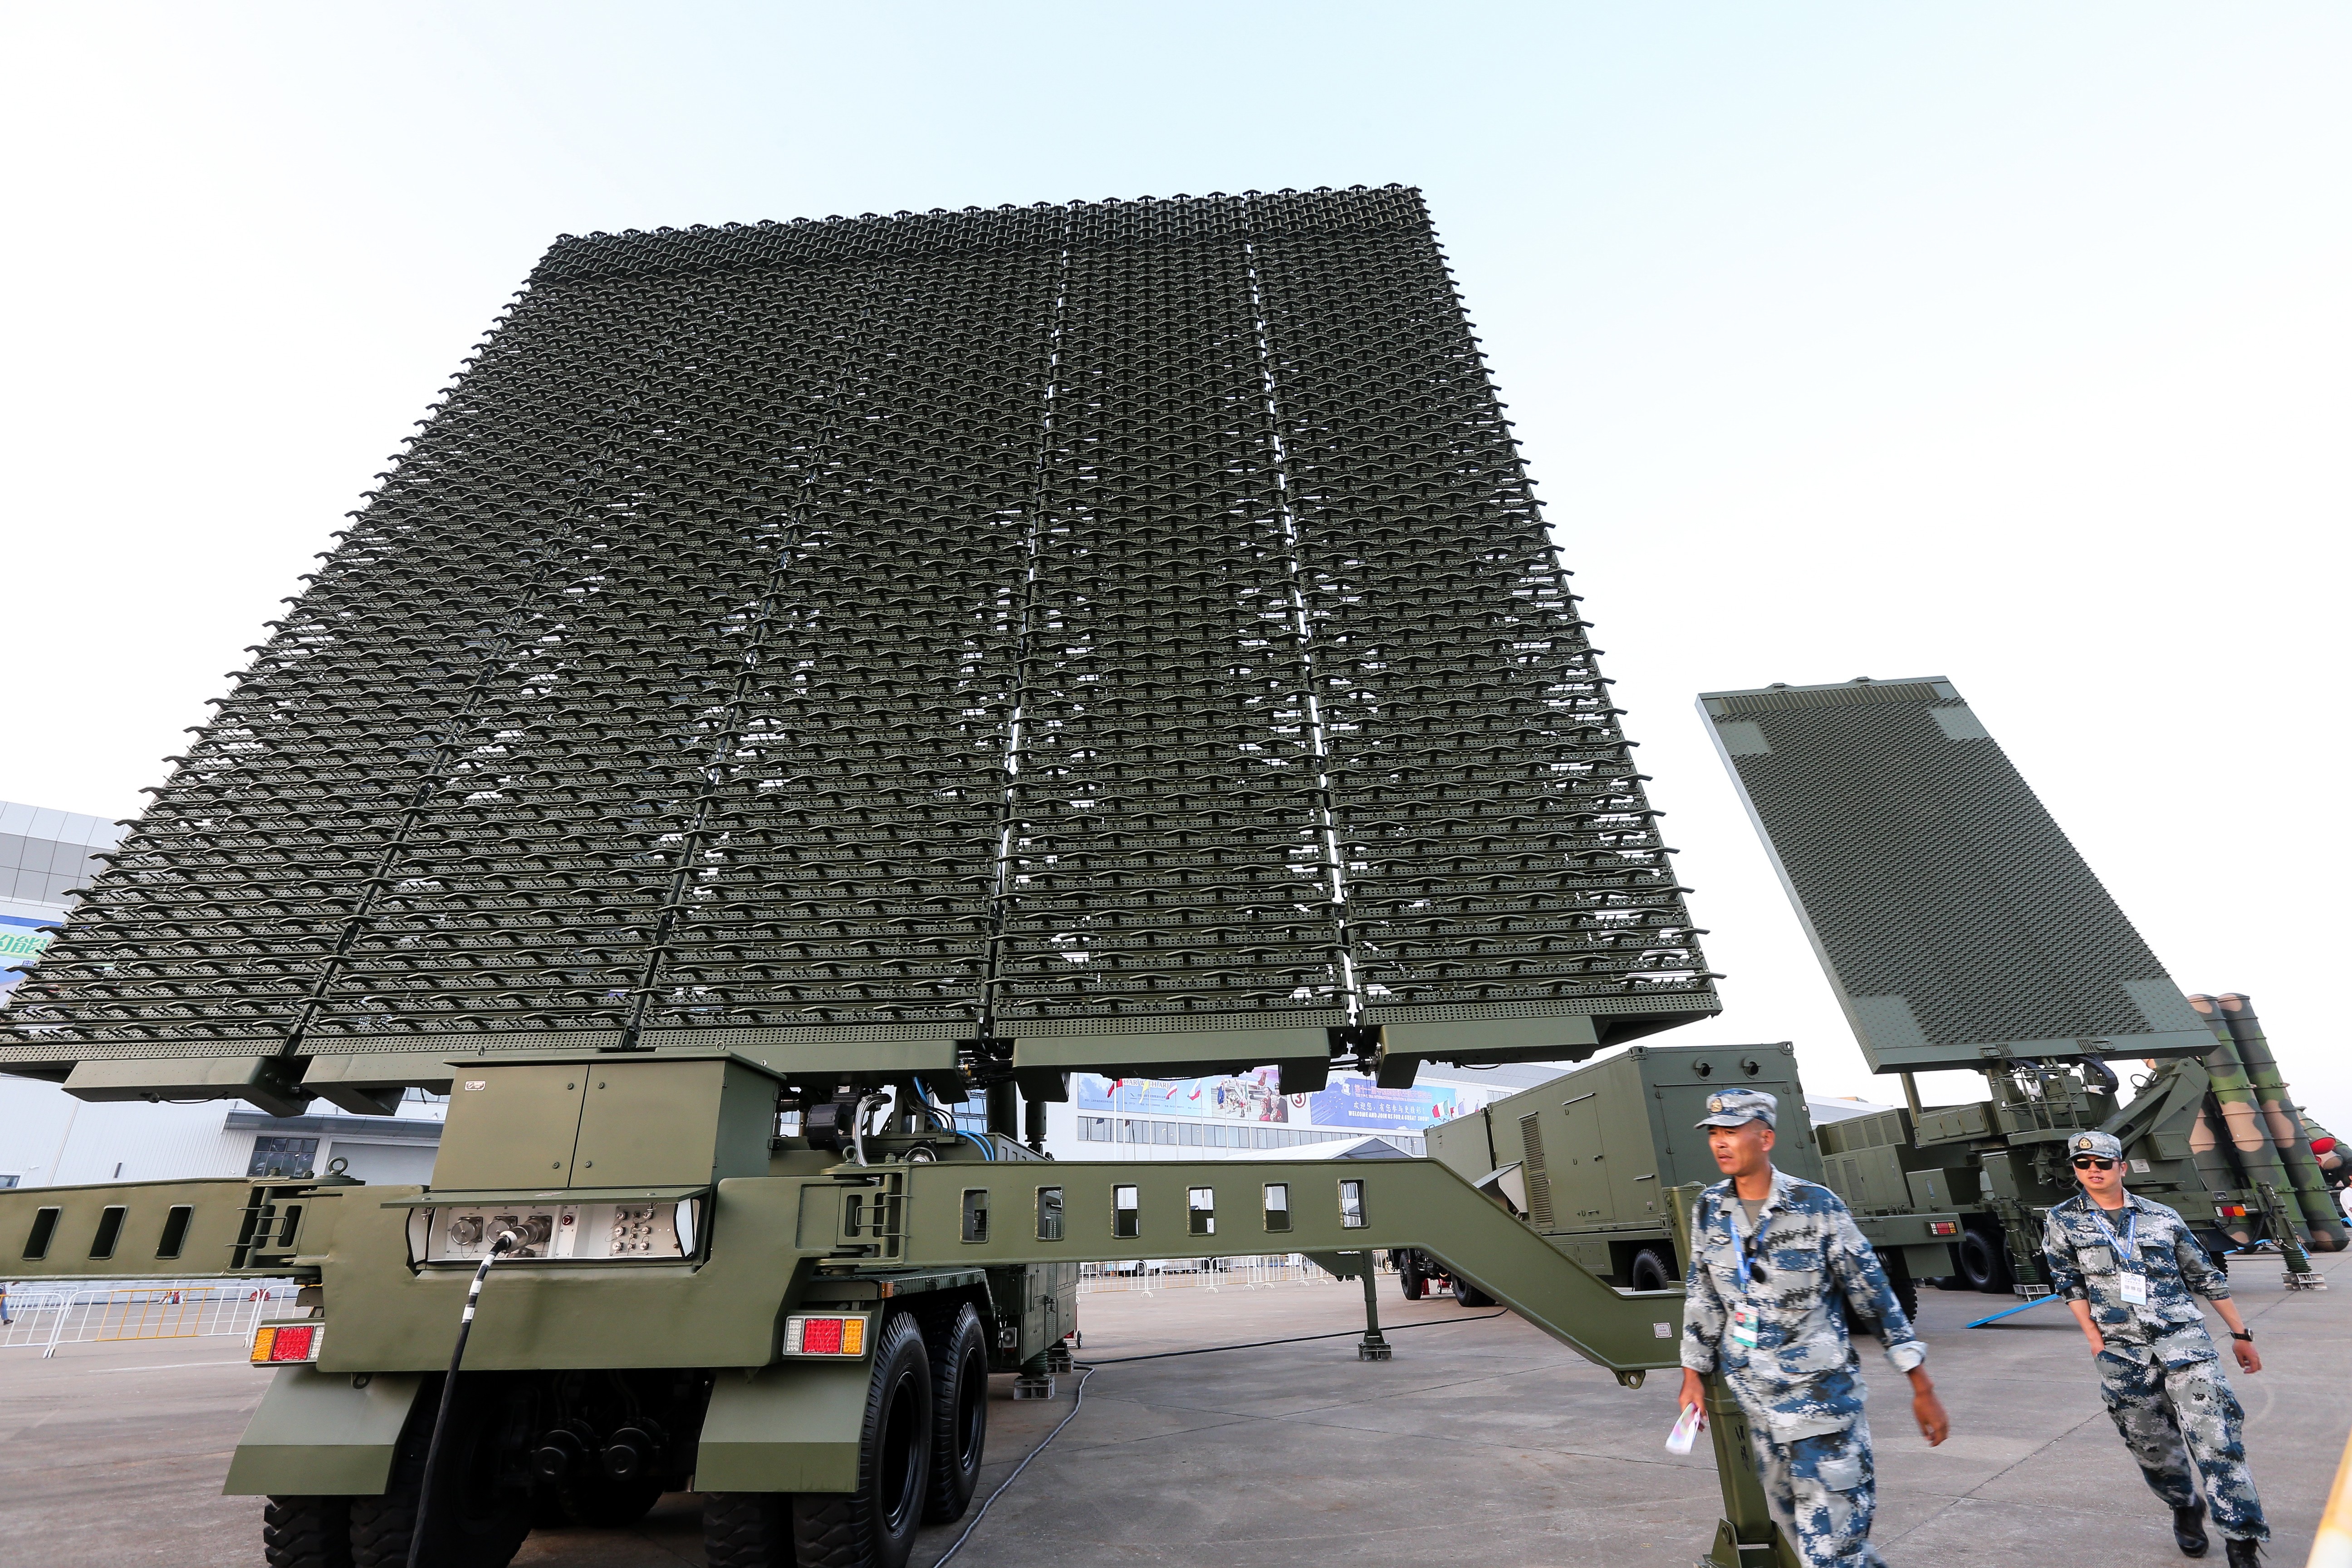 China Develops 'Anti-Stealth Radar' So Small That It Could Be Set Up  Anywhere, Including Rooftops - Scientists